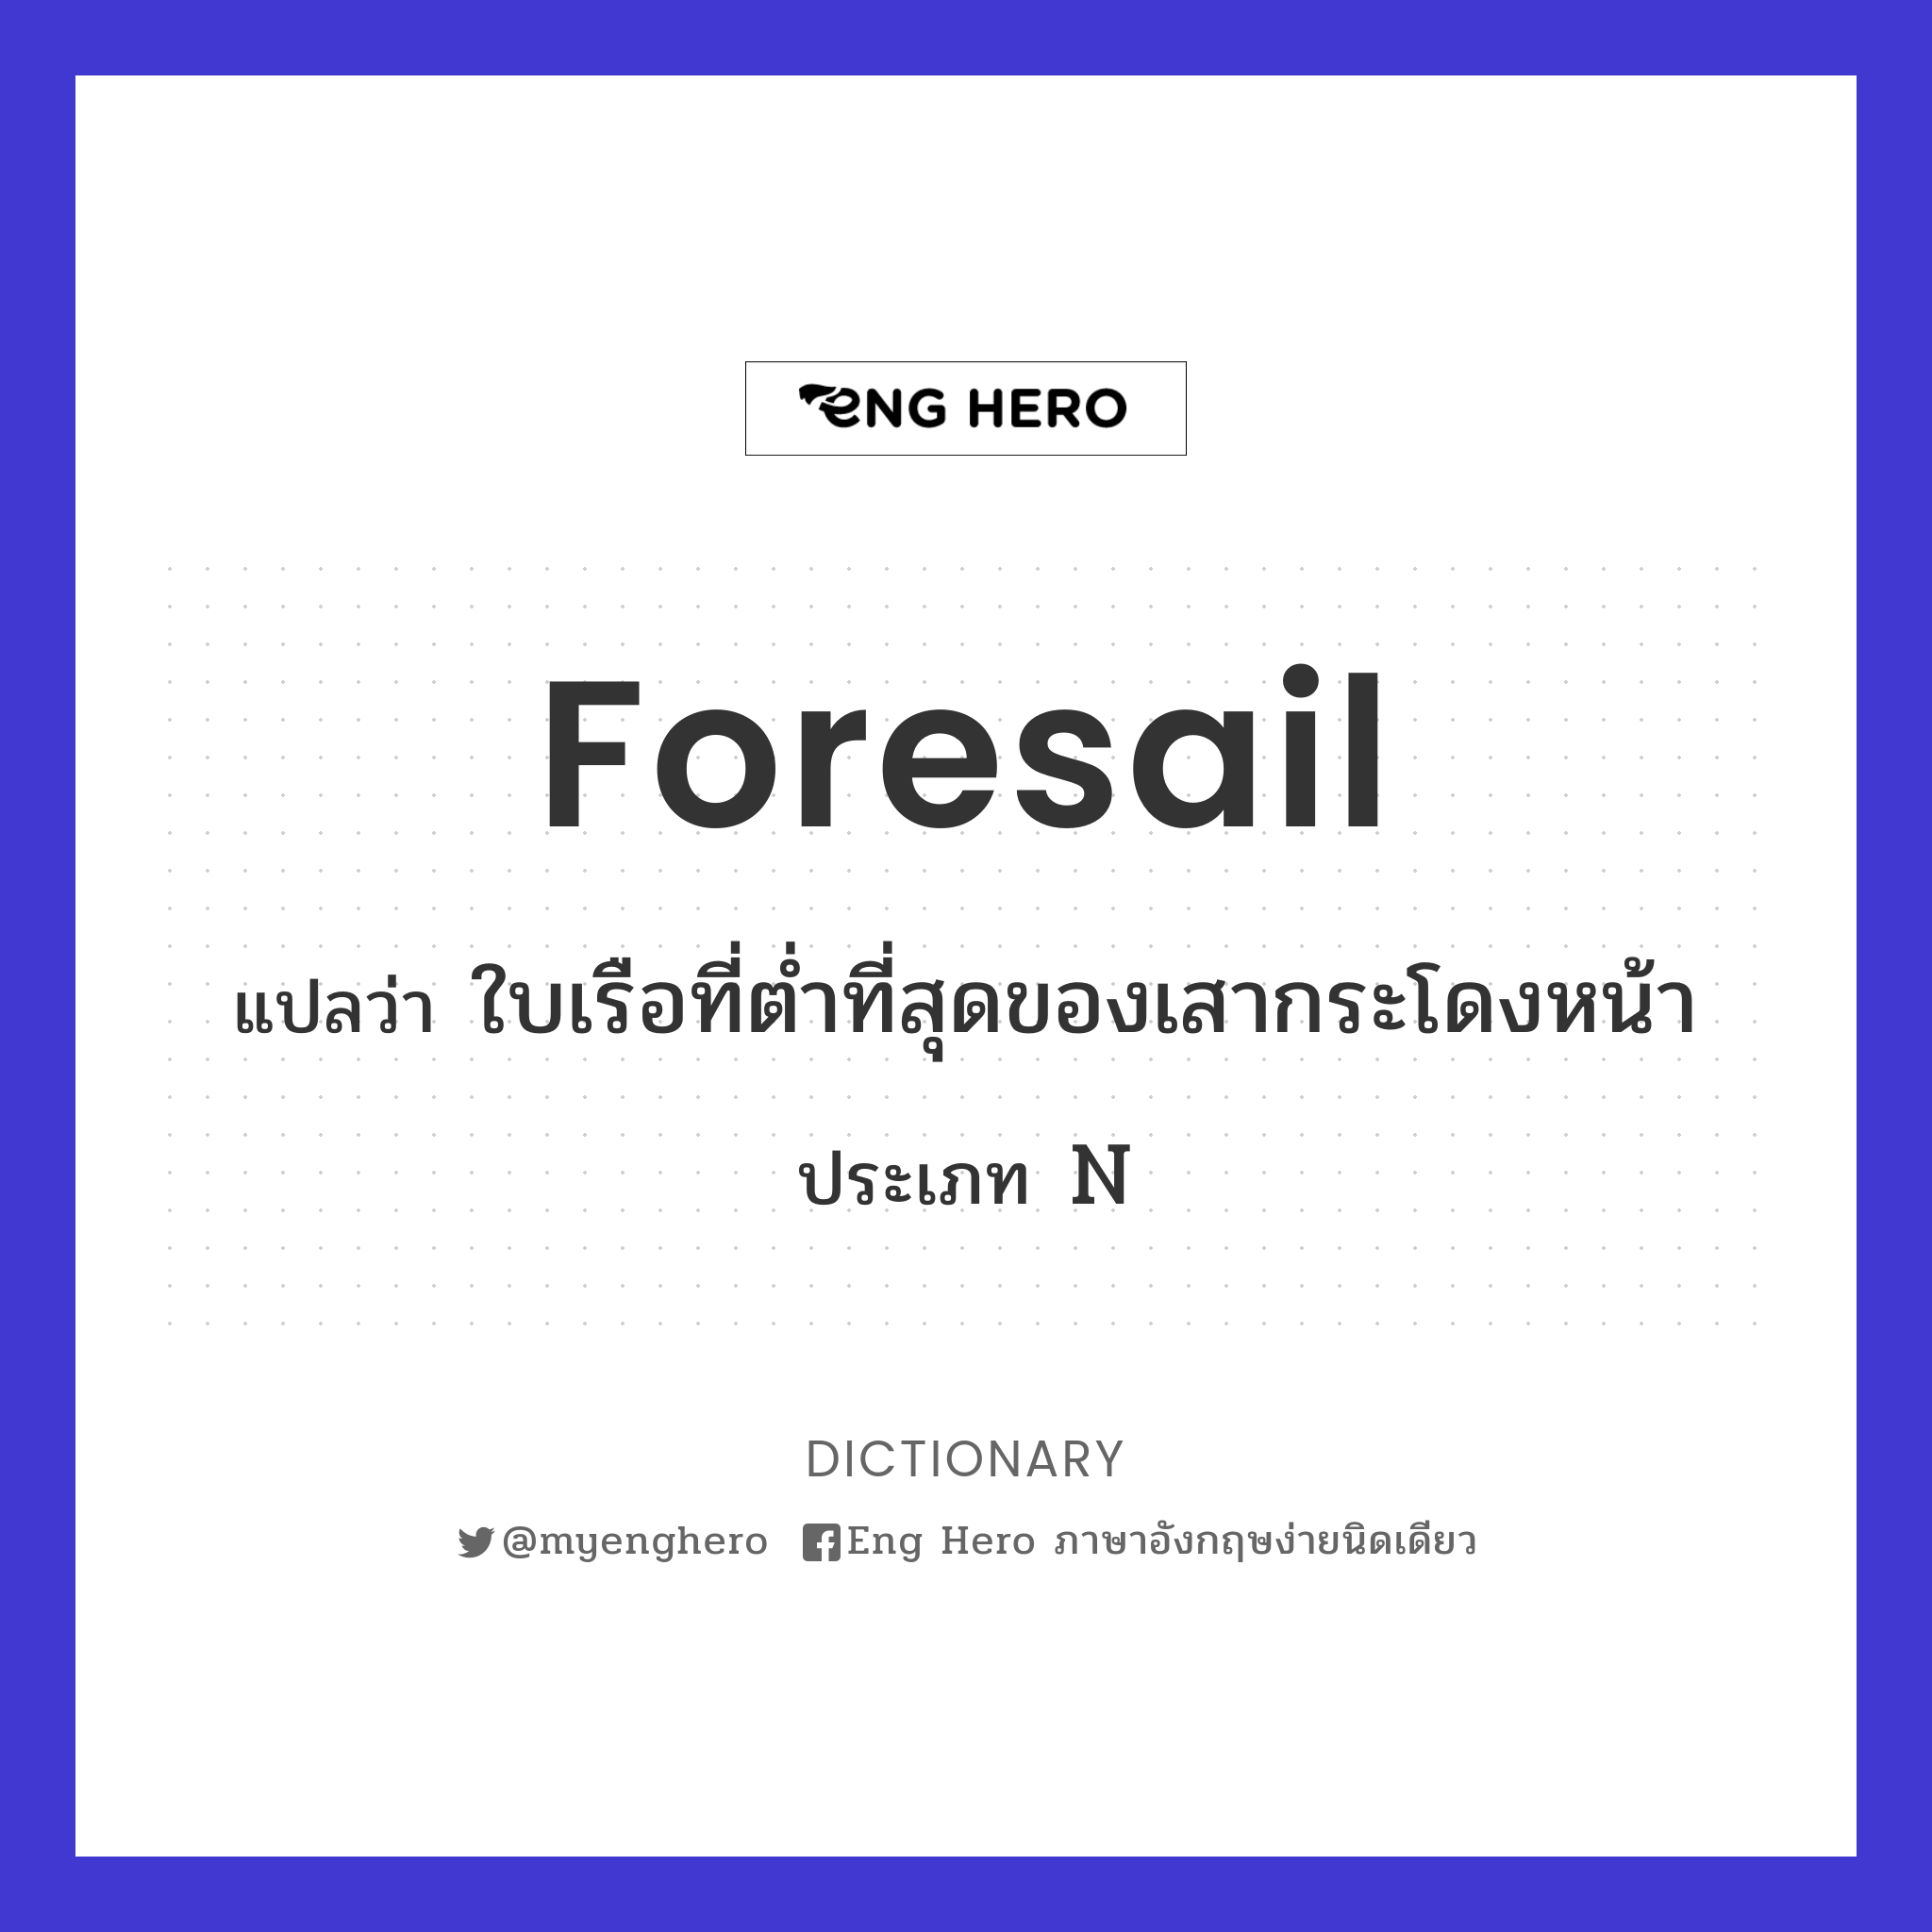 foresail